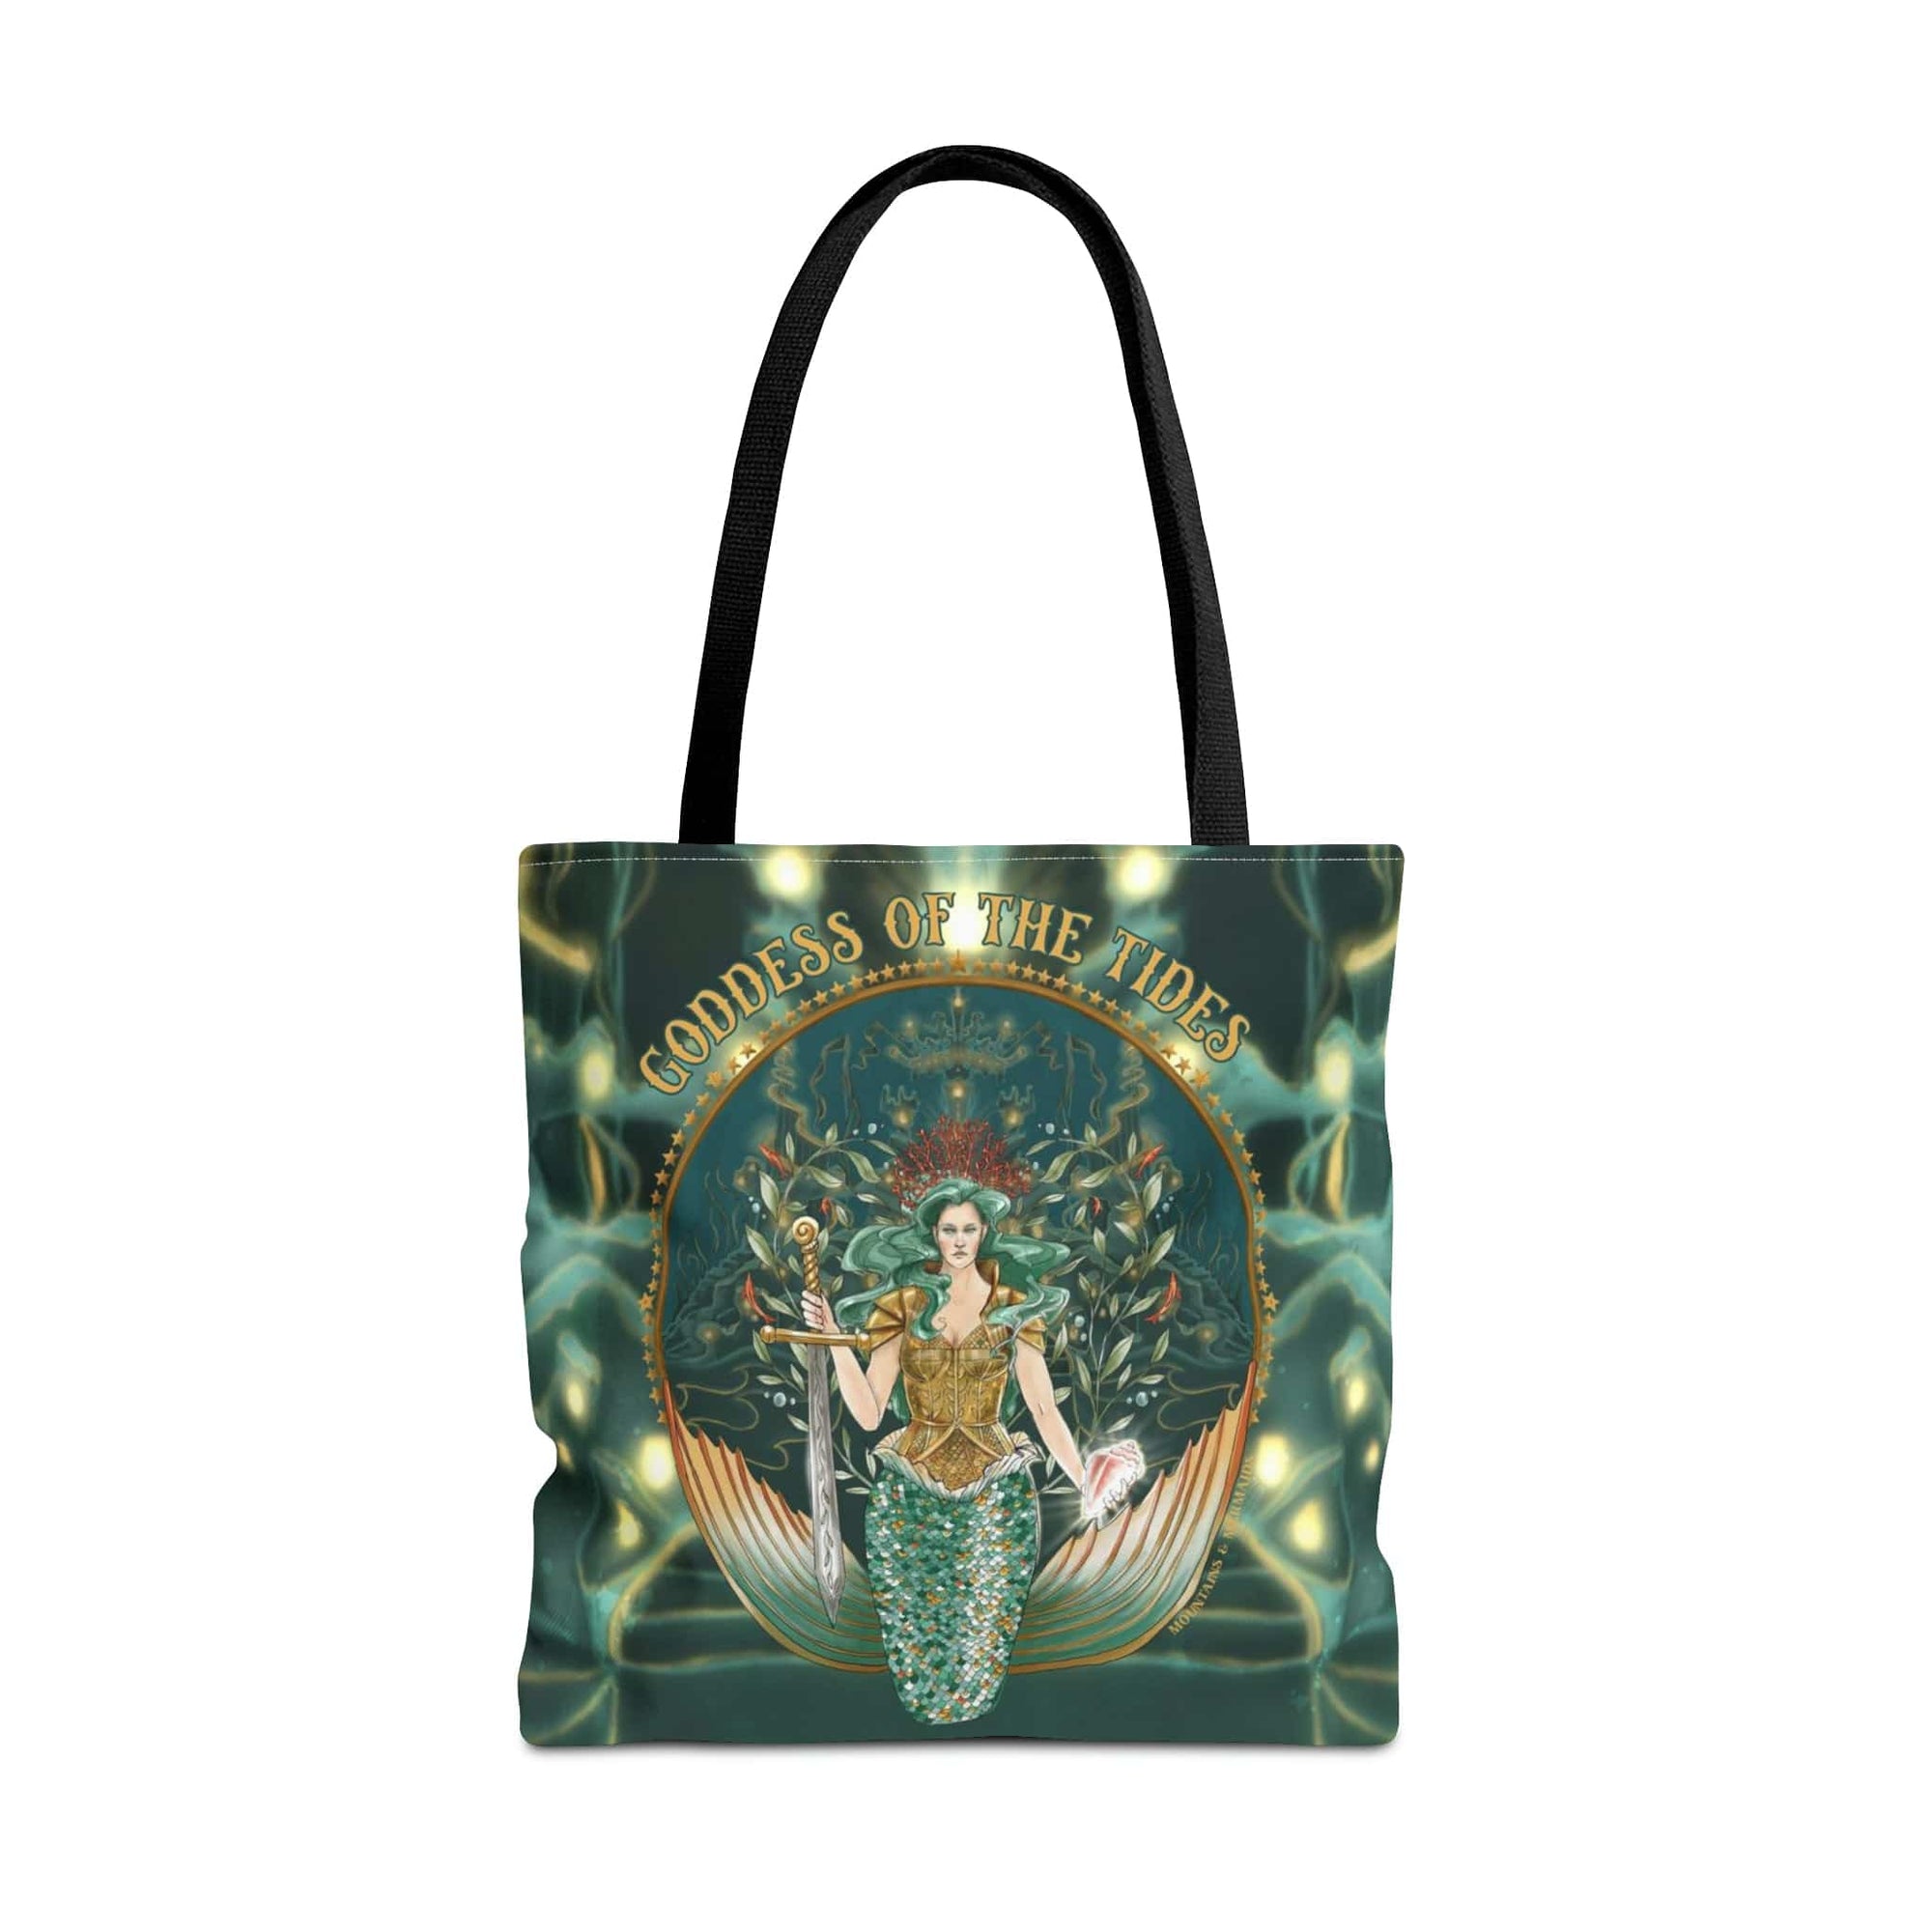 Goddess Of The Tides Tote Bag - Mountains & Mermaids